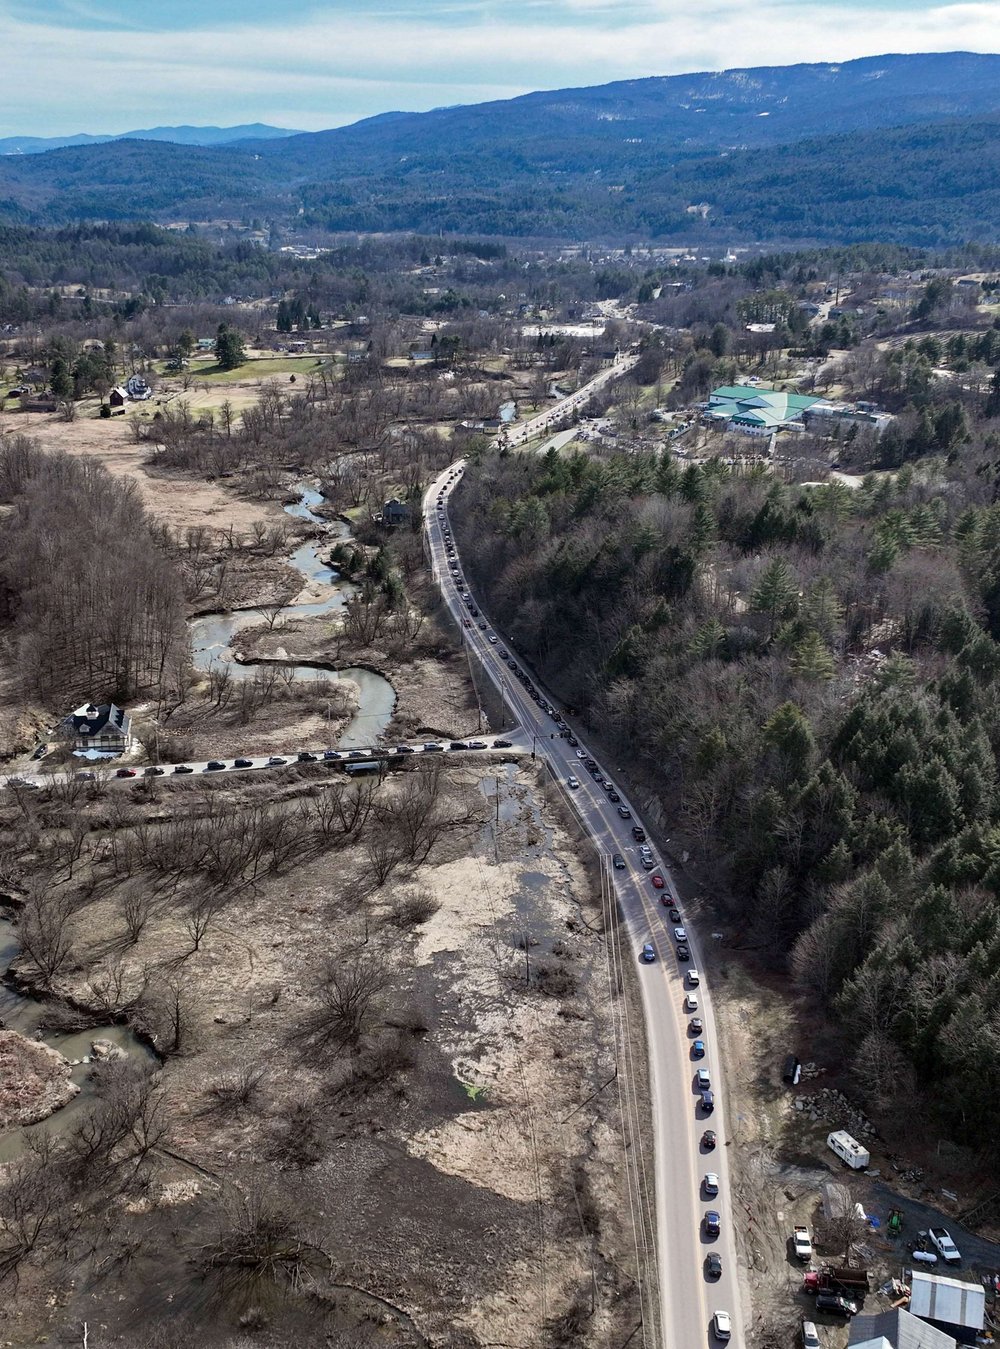   Above the Gupril Road/Rt. 100 intersection. Ben &amp; Jerry’s factory is on the top right. Photo by Gordon Miller  